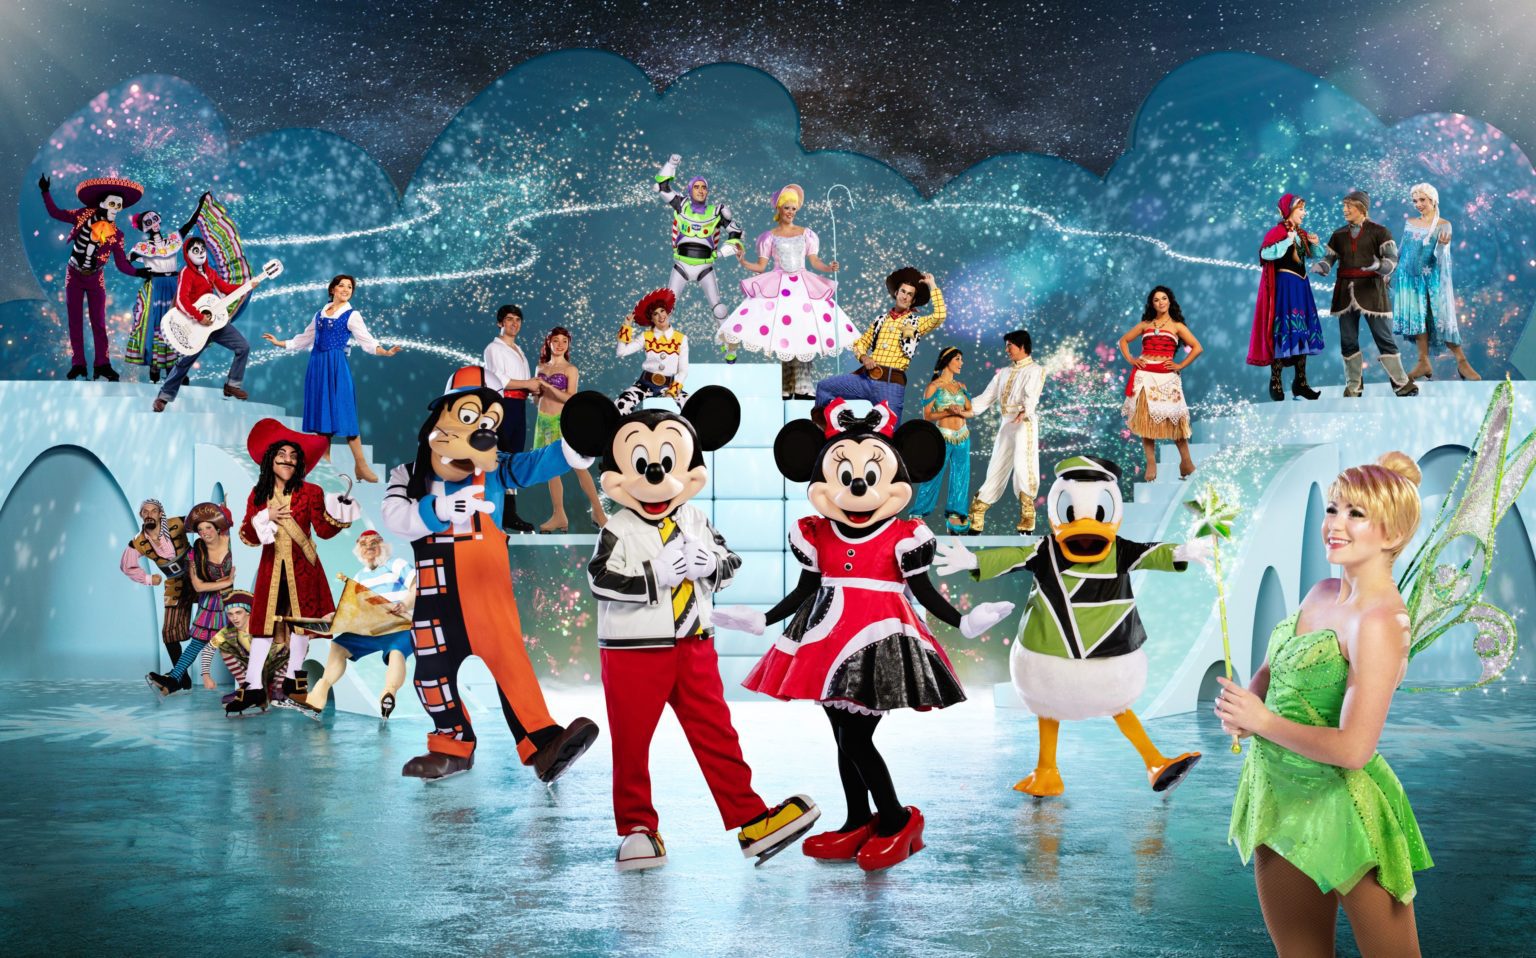 Disney On Ice has announced new 2023 tour including Cardiff